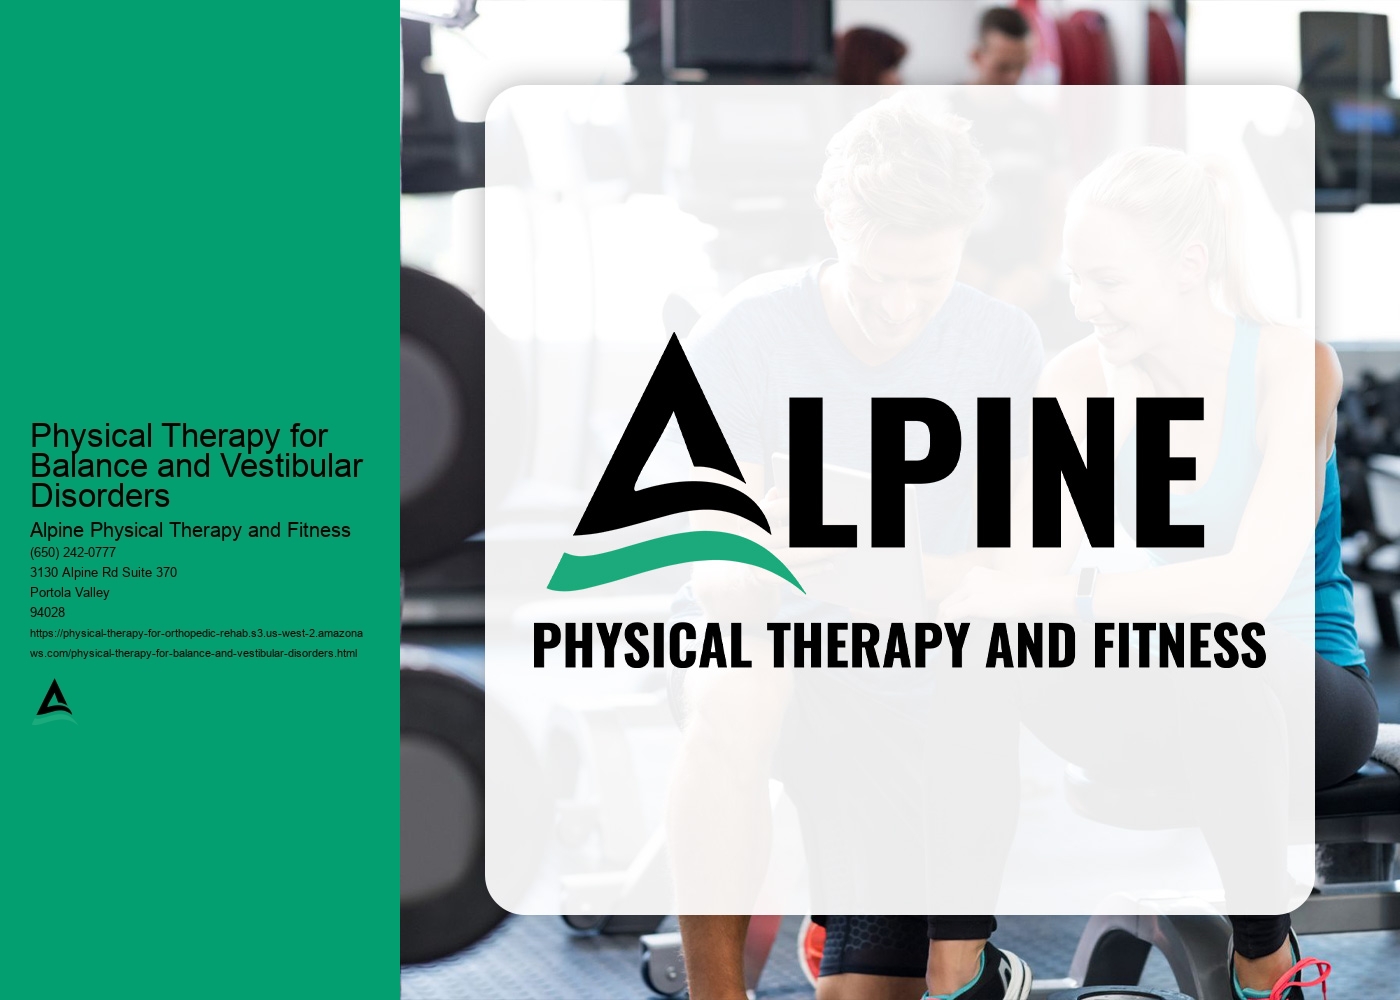 Are there any lifestyle changes or modifications that need to be made during physical therapy for balance and vestibular disorders?